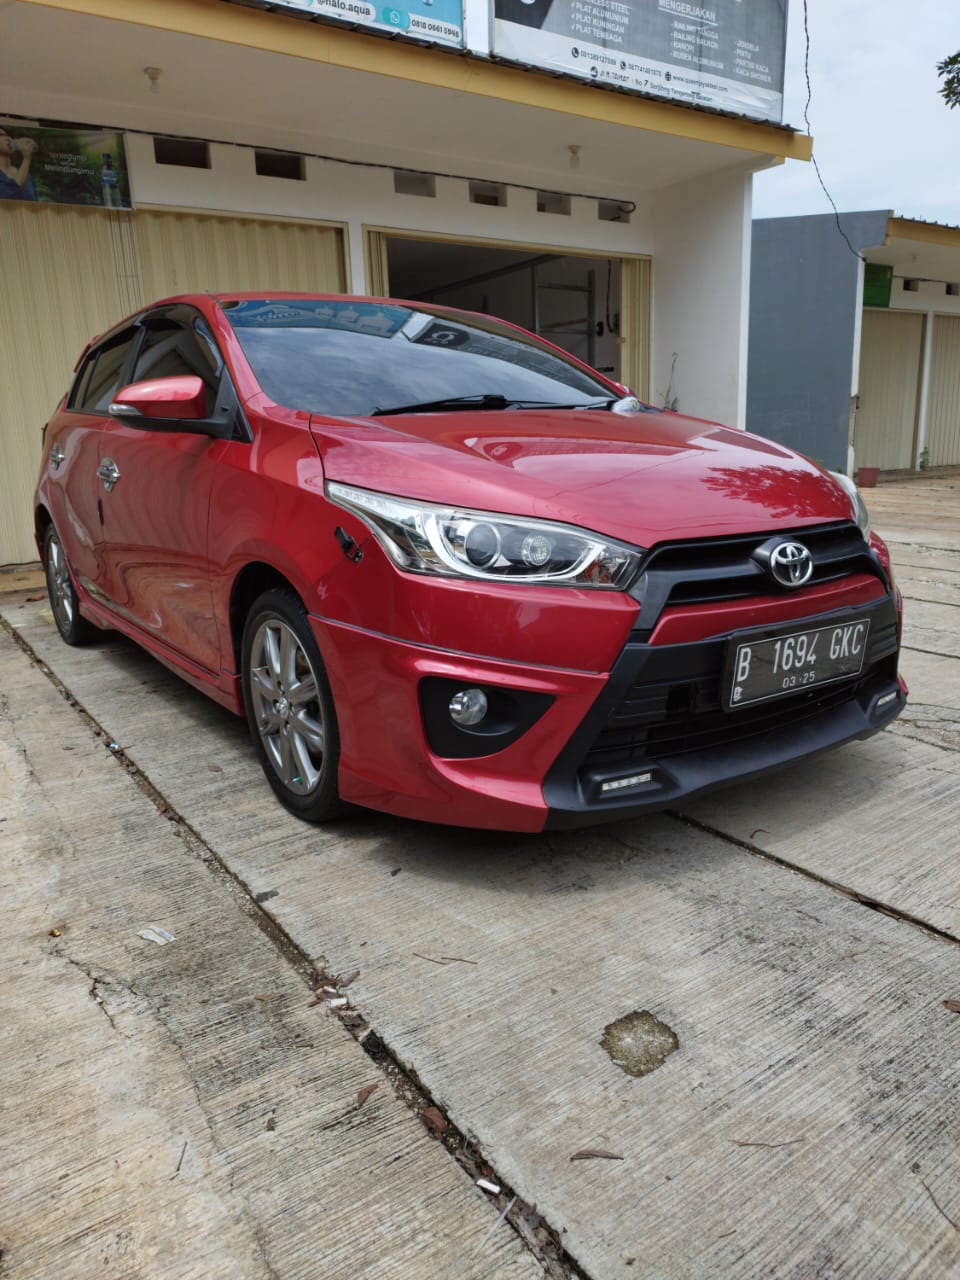 Used 2015 Toyota Yaris Heykers 1.5 S TRD AT 1.5 S TRD AT